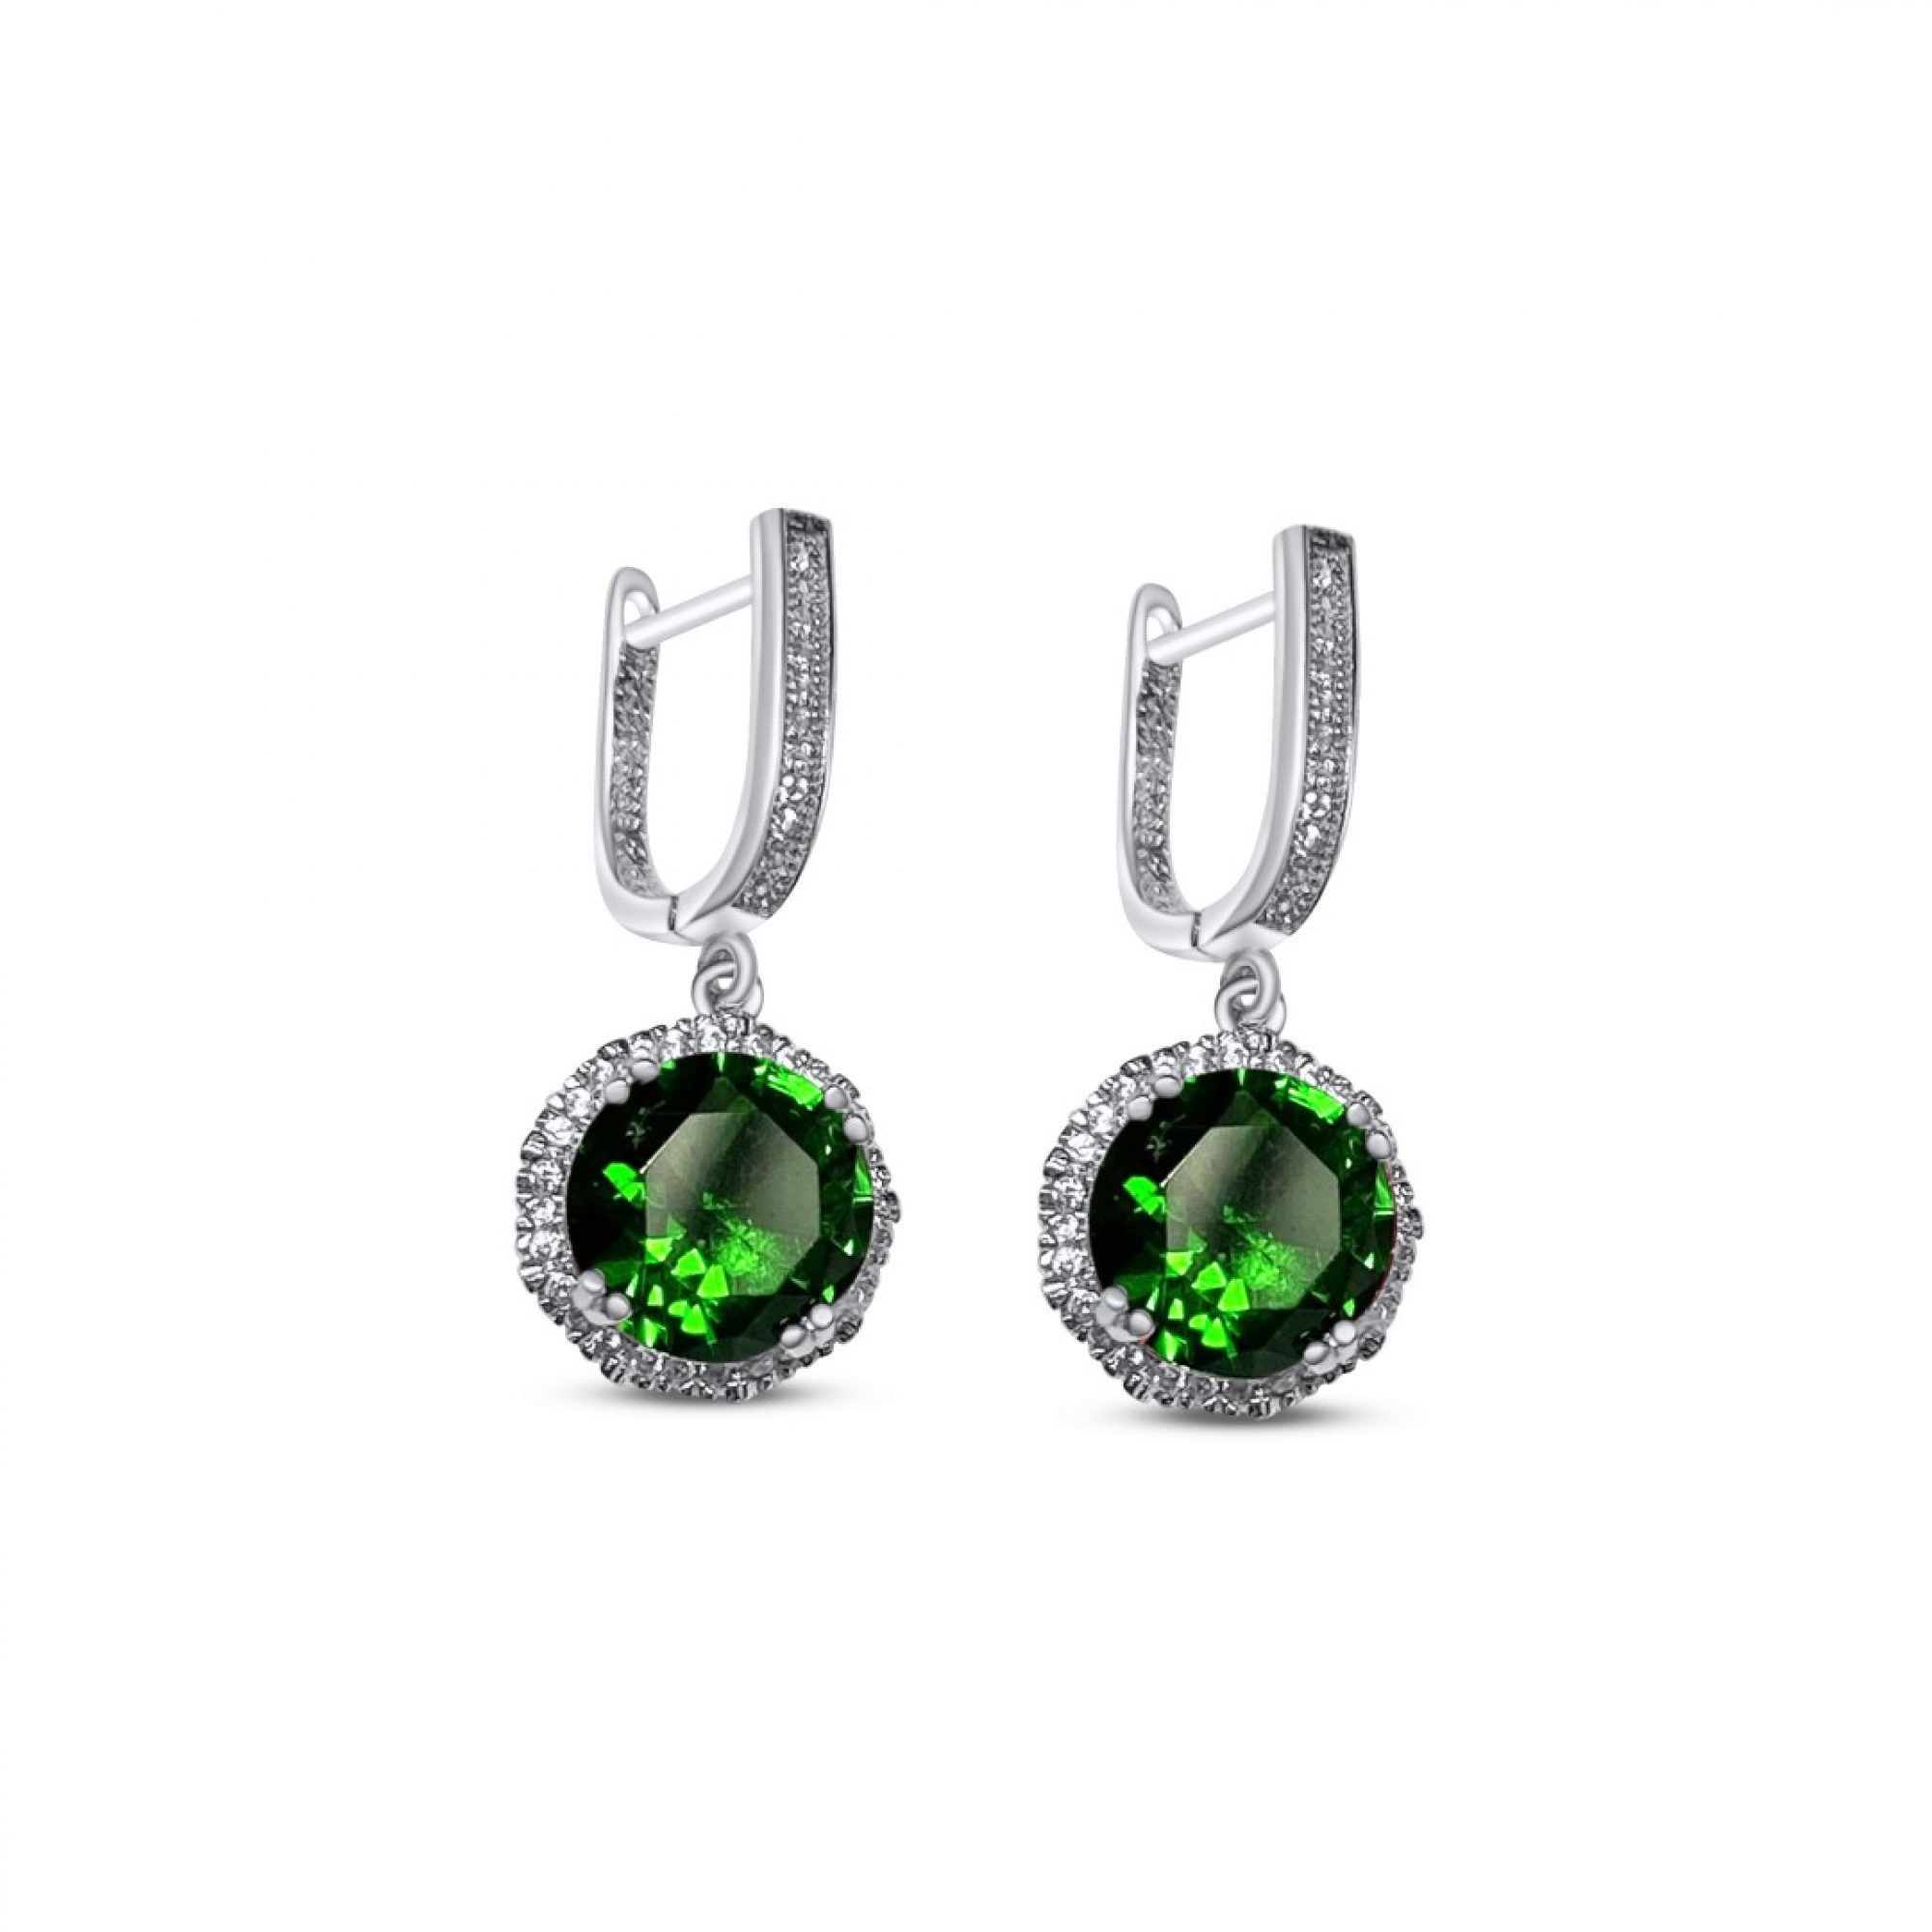 Silver earrings with emerald and zircon stones 